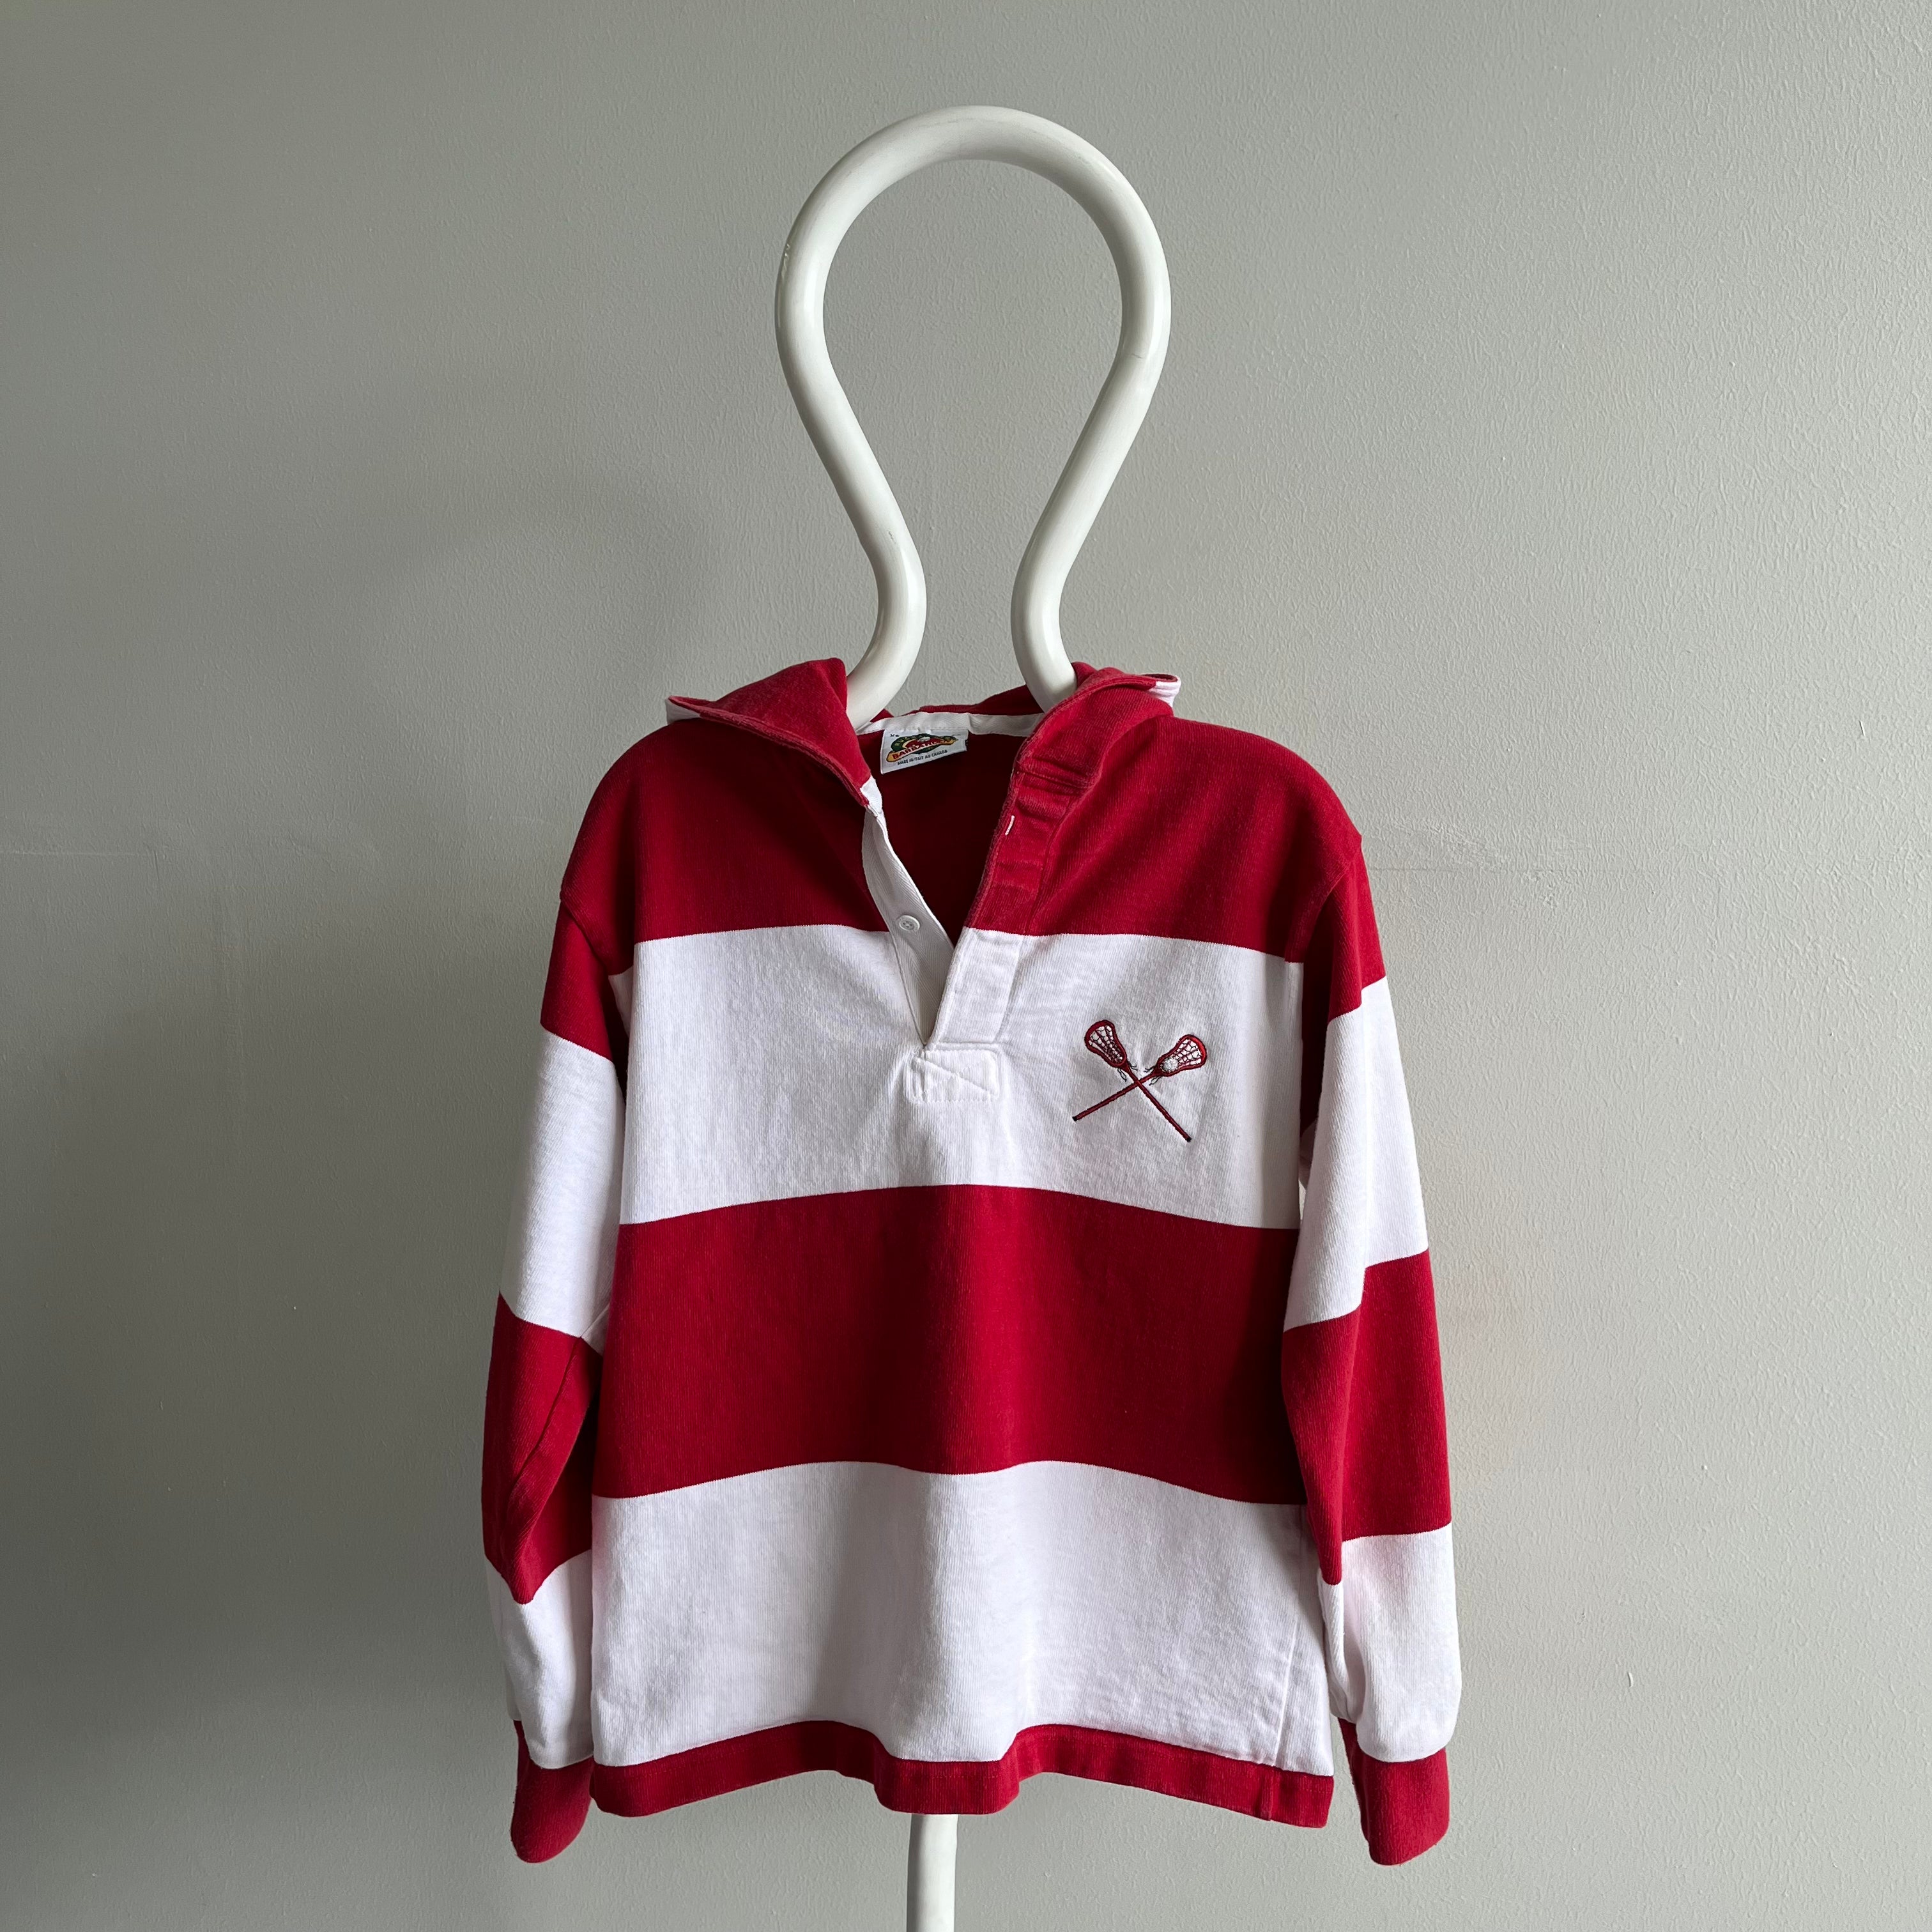 1990s Rad Hooded Rugby LaCrosse Shirt - Rare Smaller Size